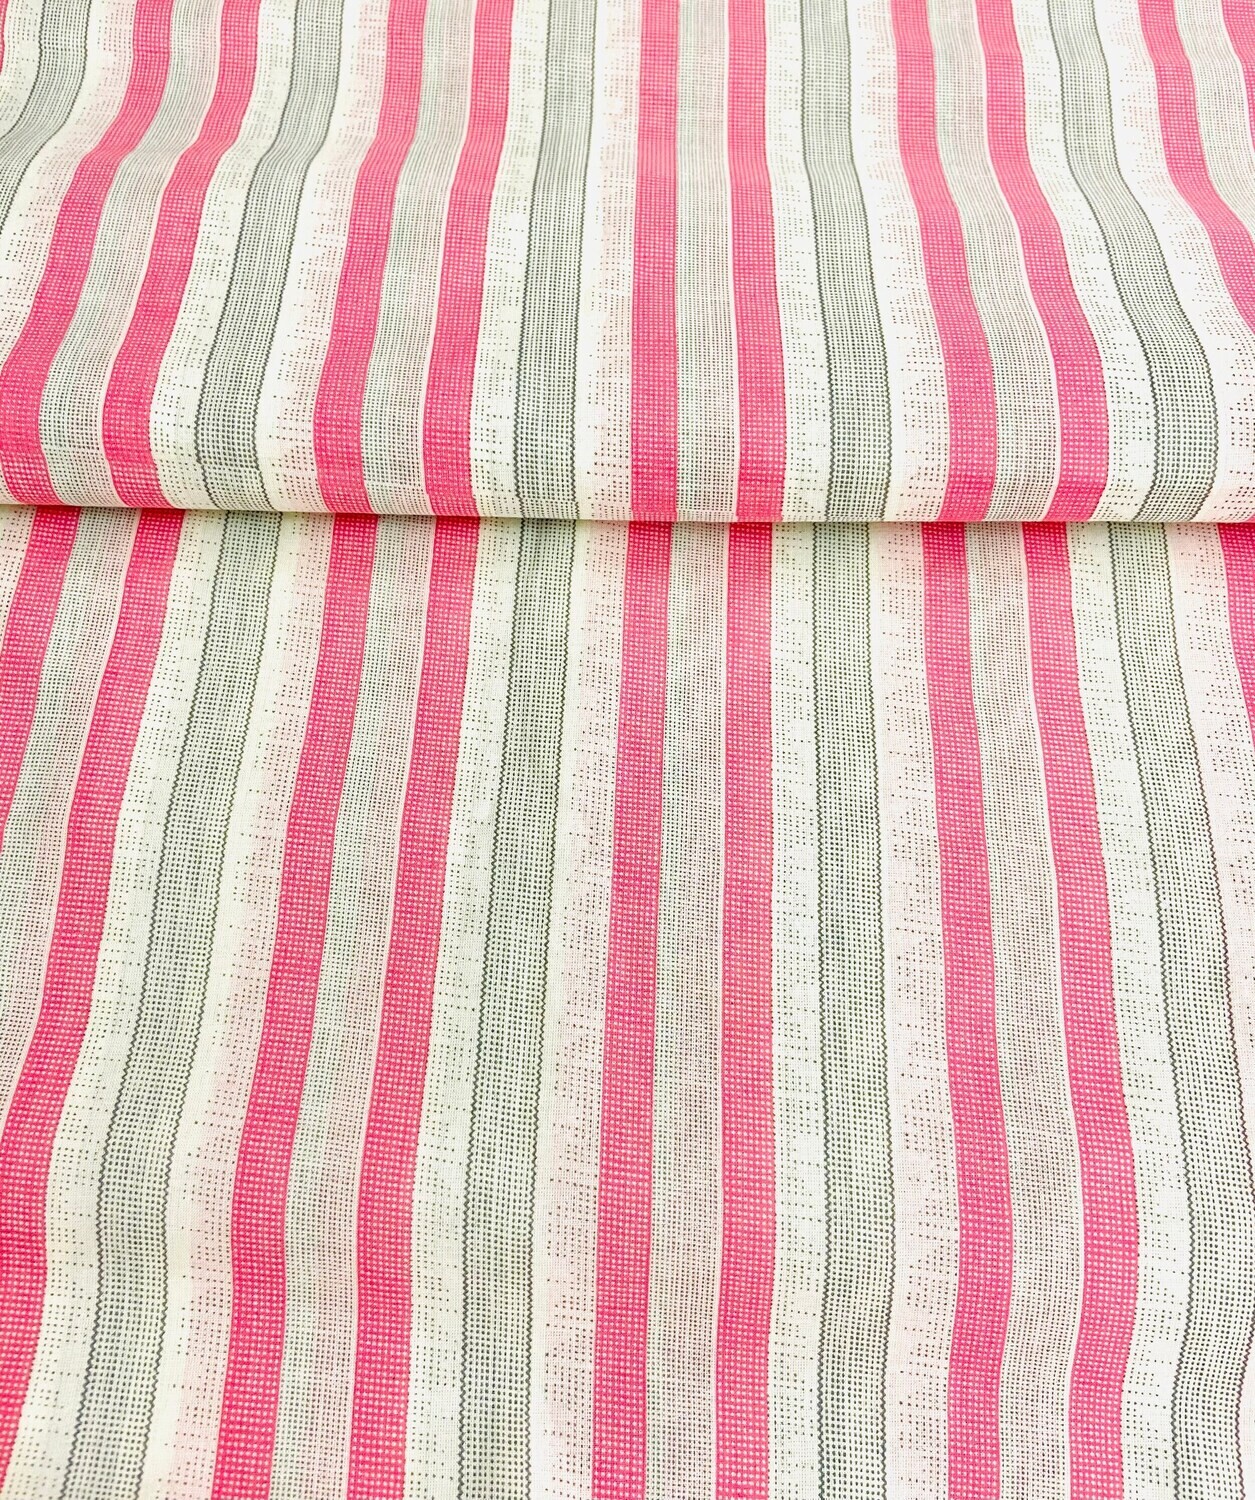 Wide Striped Cotton Fabric, Dress Fabric, Lightweight Cotton Fabrics for Sewing Crafting Quilting Fabric, 44 Inches Wide